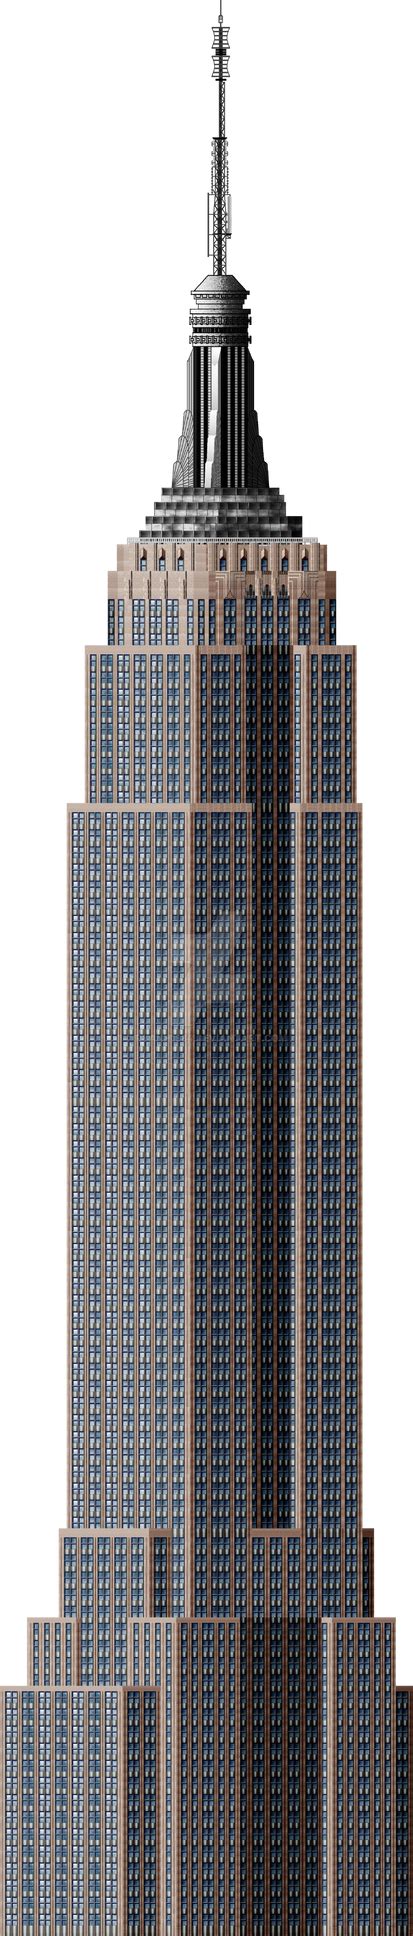 Empire State Building 2015 By Ryanh1984 On Deviantart